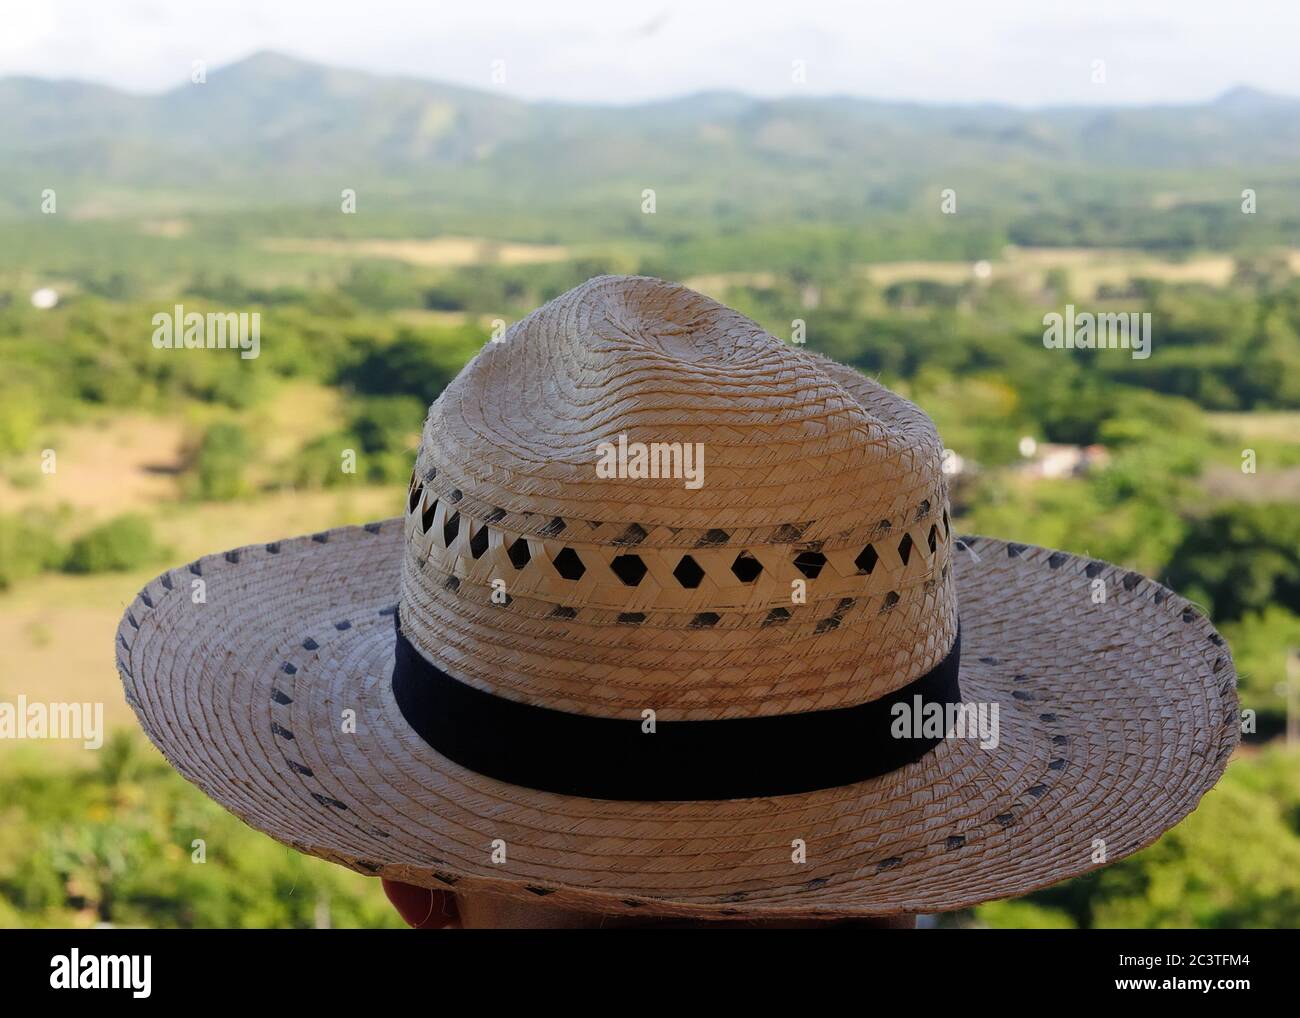 The tourist in the traditional hat is admiring views from the tower on the sugar plantation Iznaga, Cuba. Stock Photo